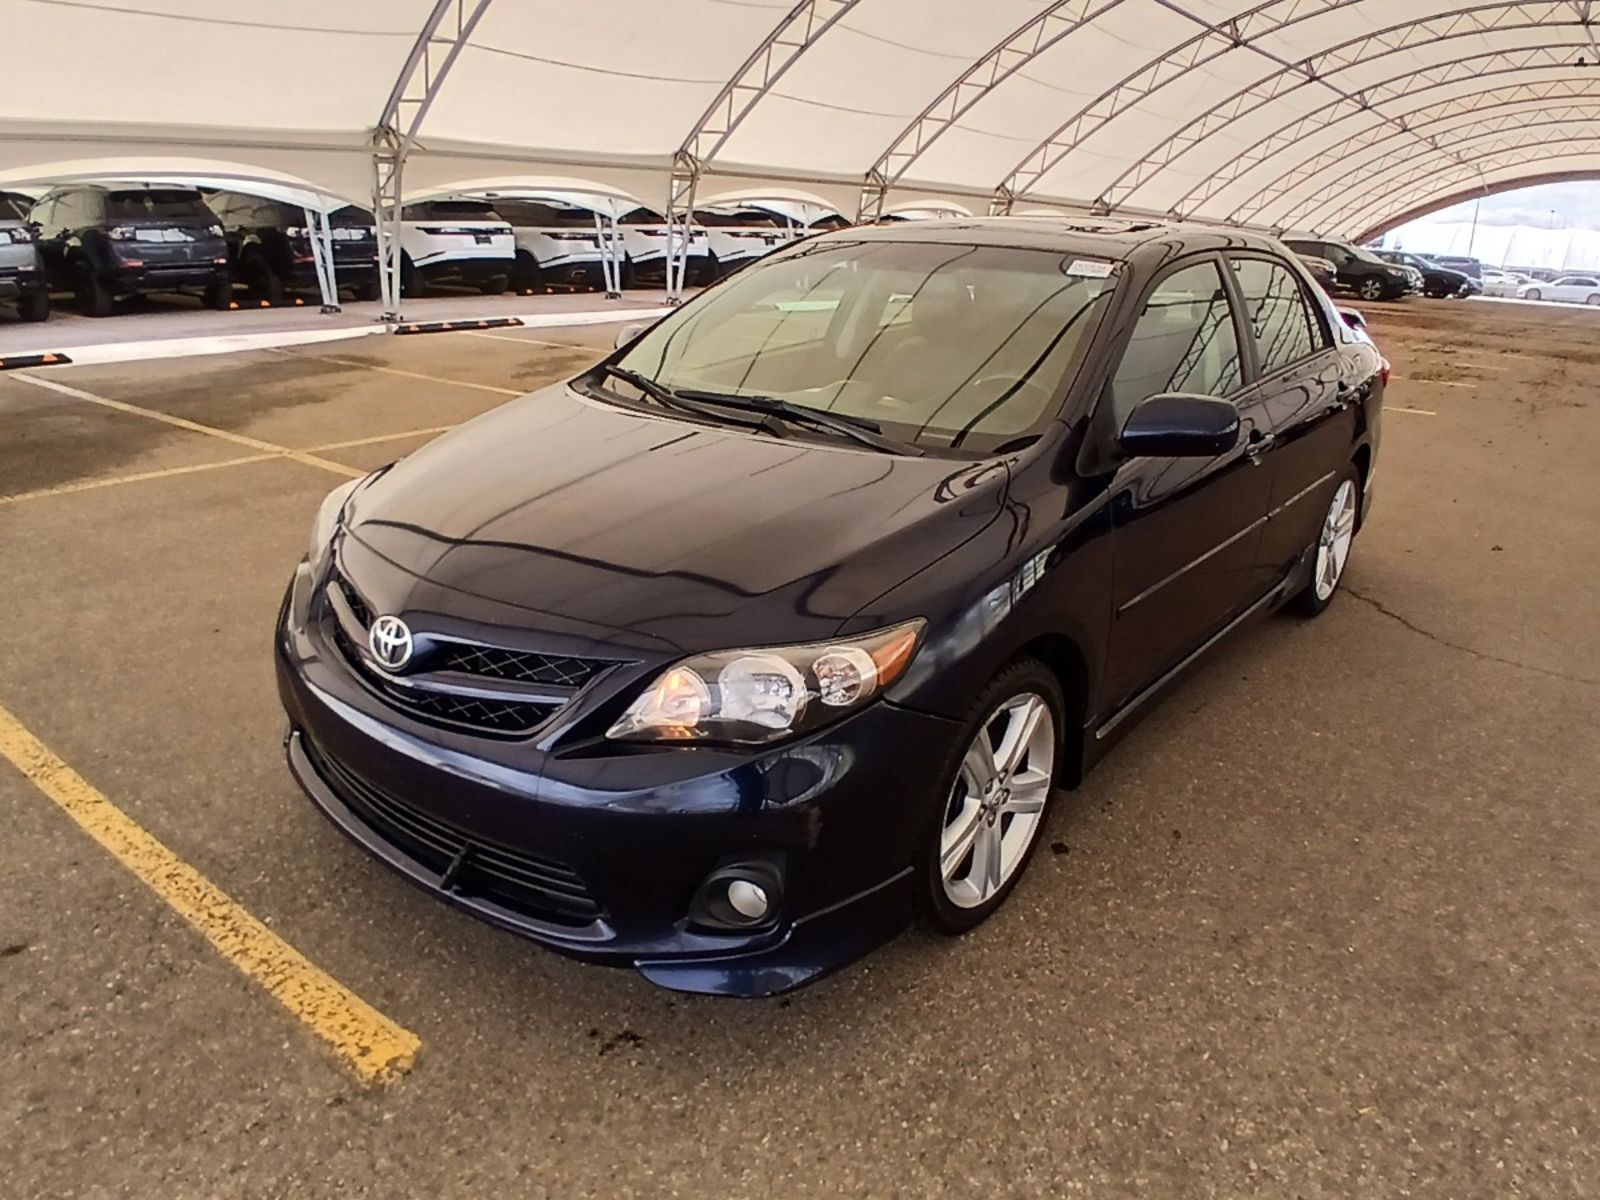 2012 Toyota Corolla XRS - One Owner | No Accidents